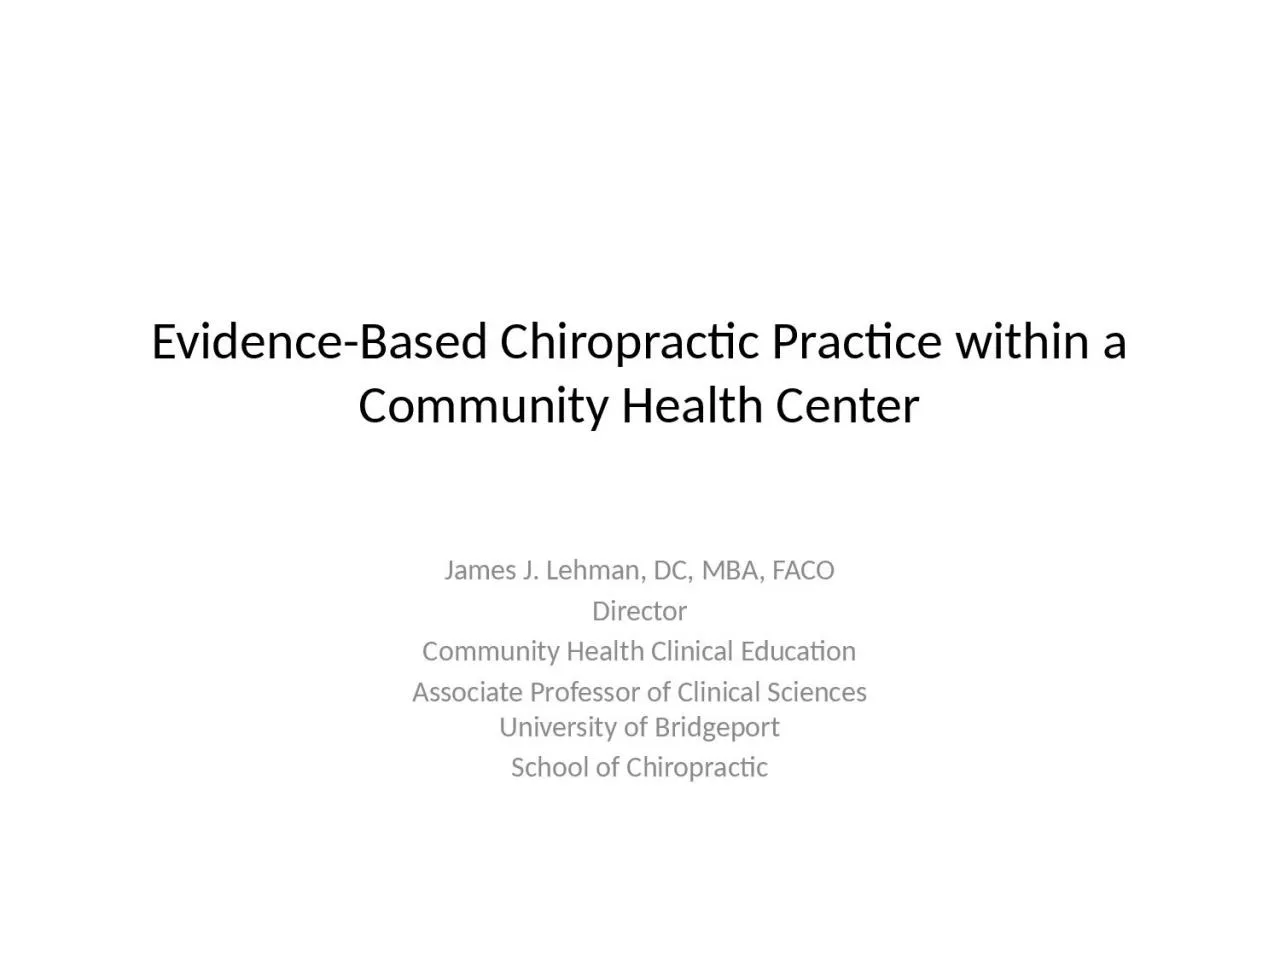 Evidence-Based Chiropractic Practice within a Community Health Center